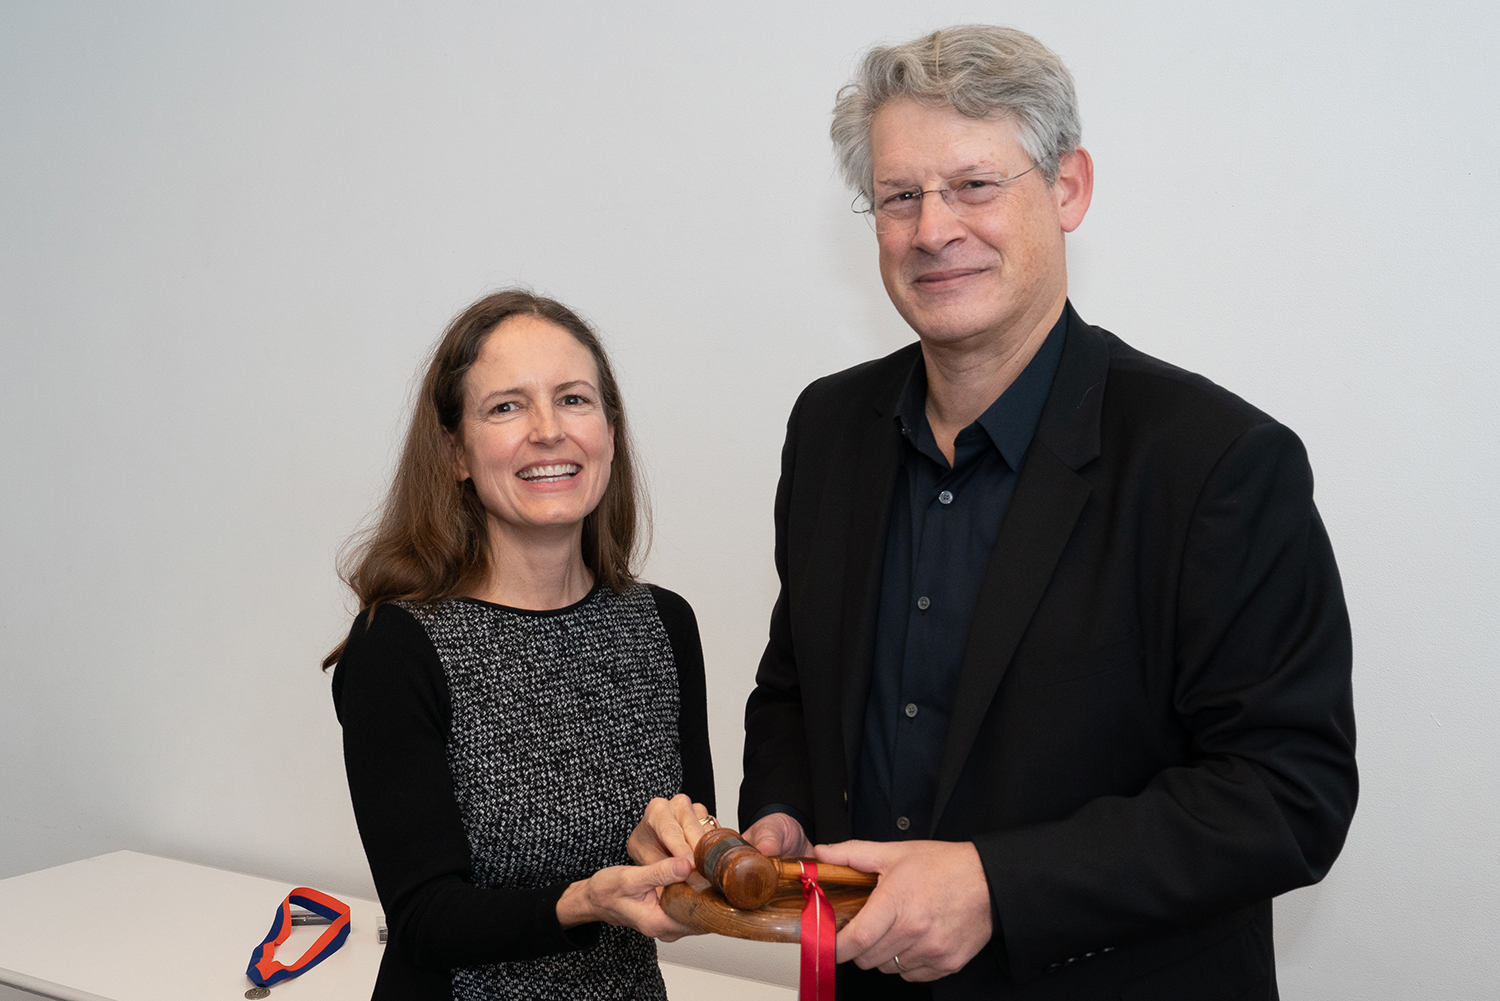 Photo of Ken Lewis passing a wooden gavel to Andrea Lamberti.